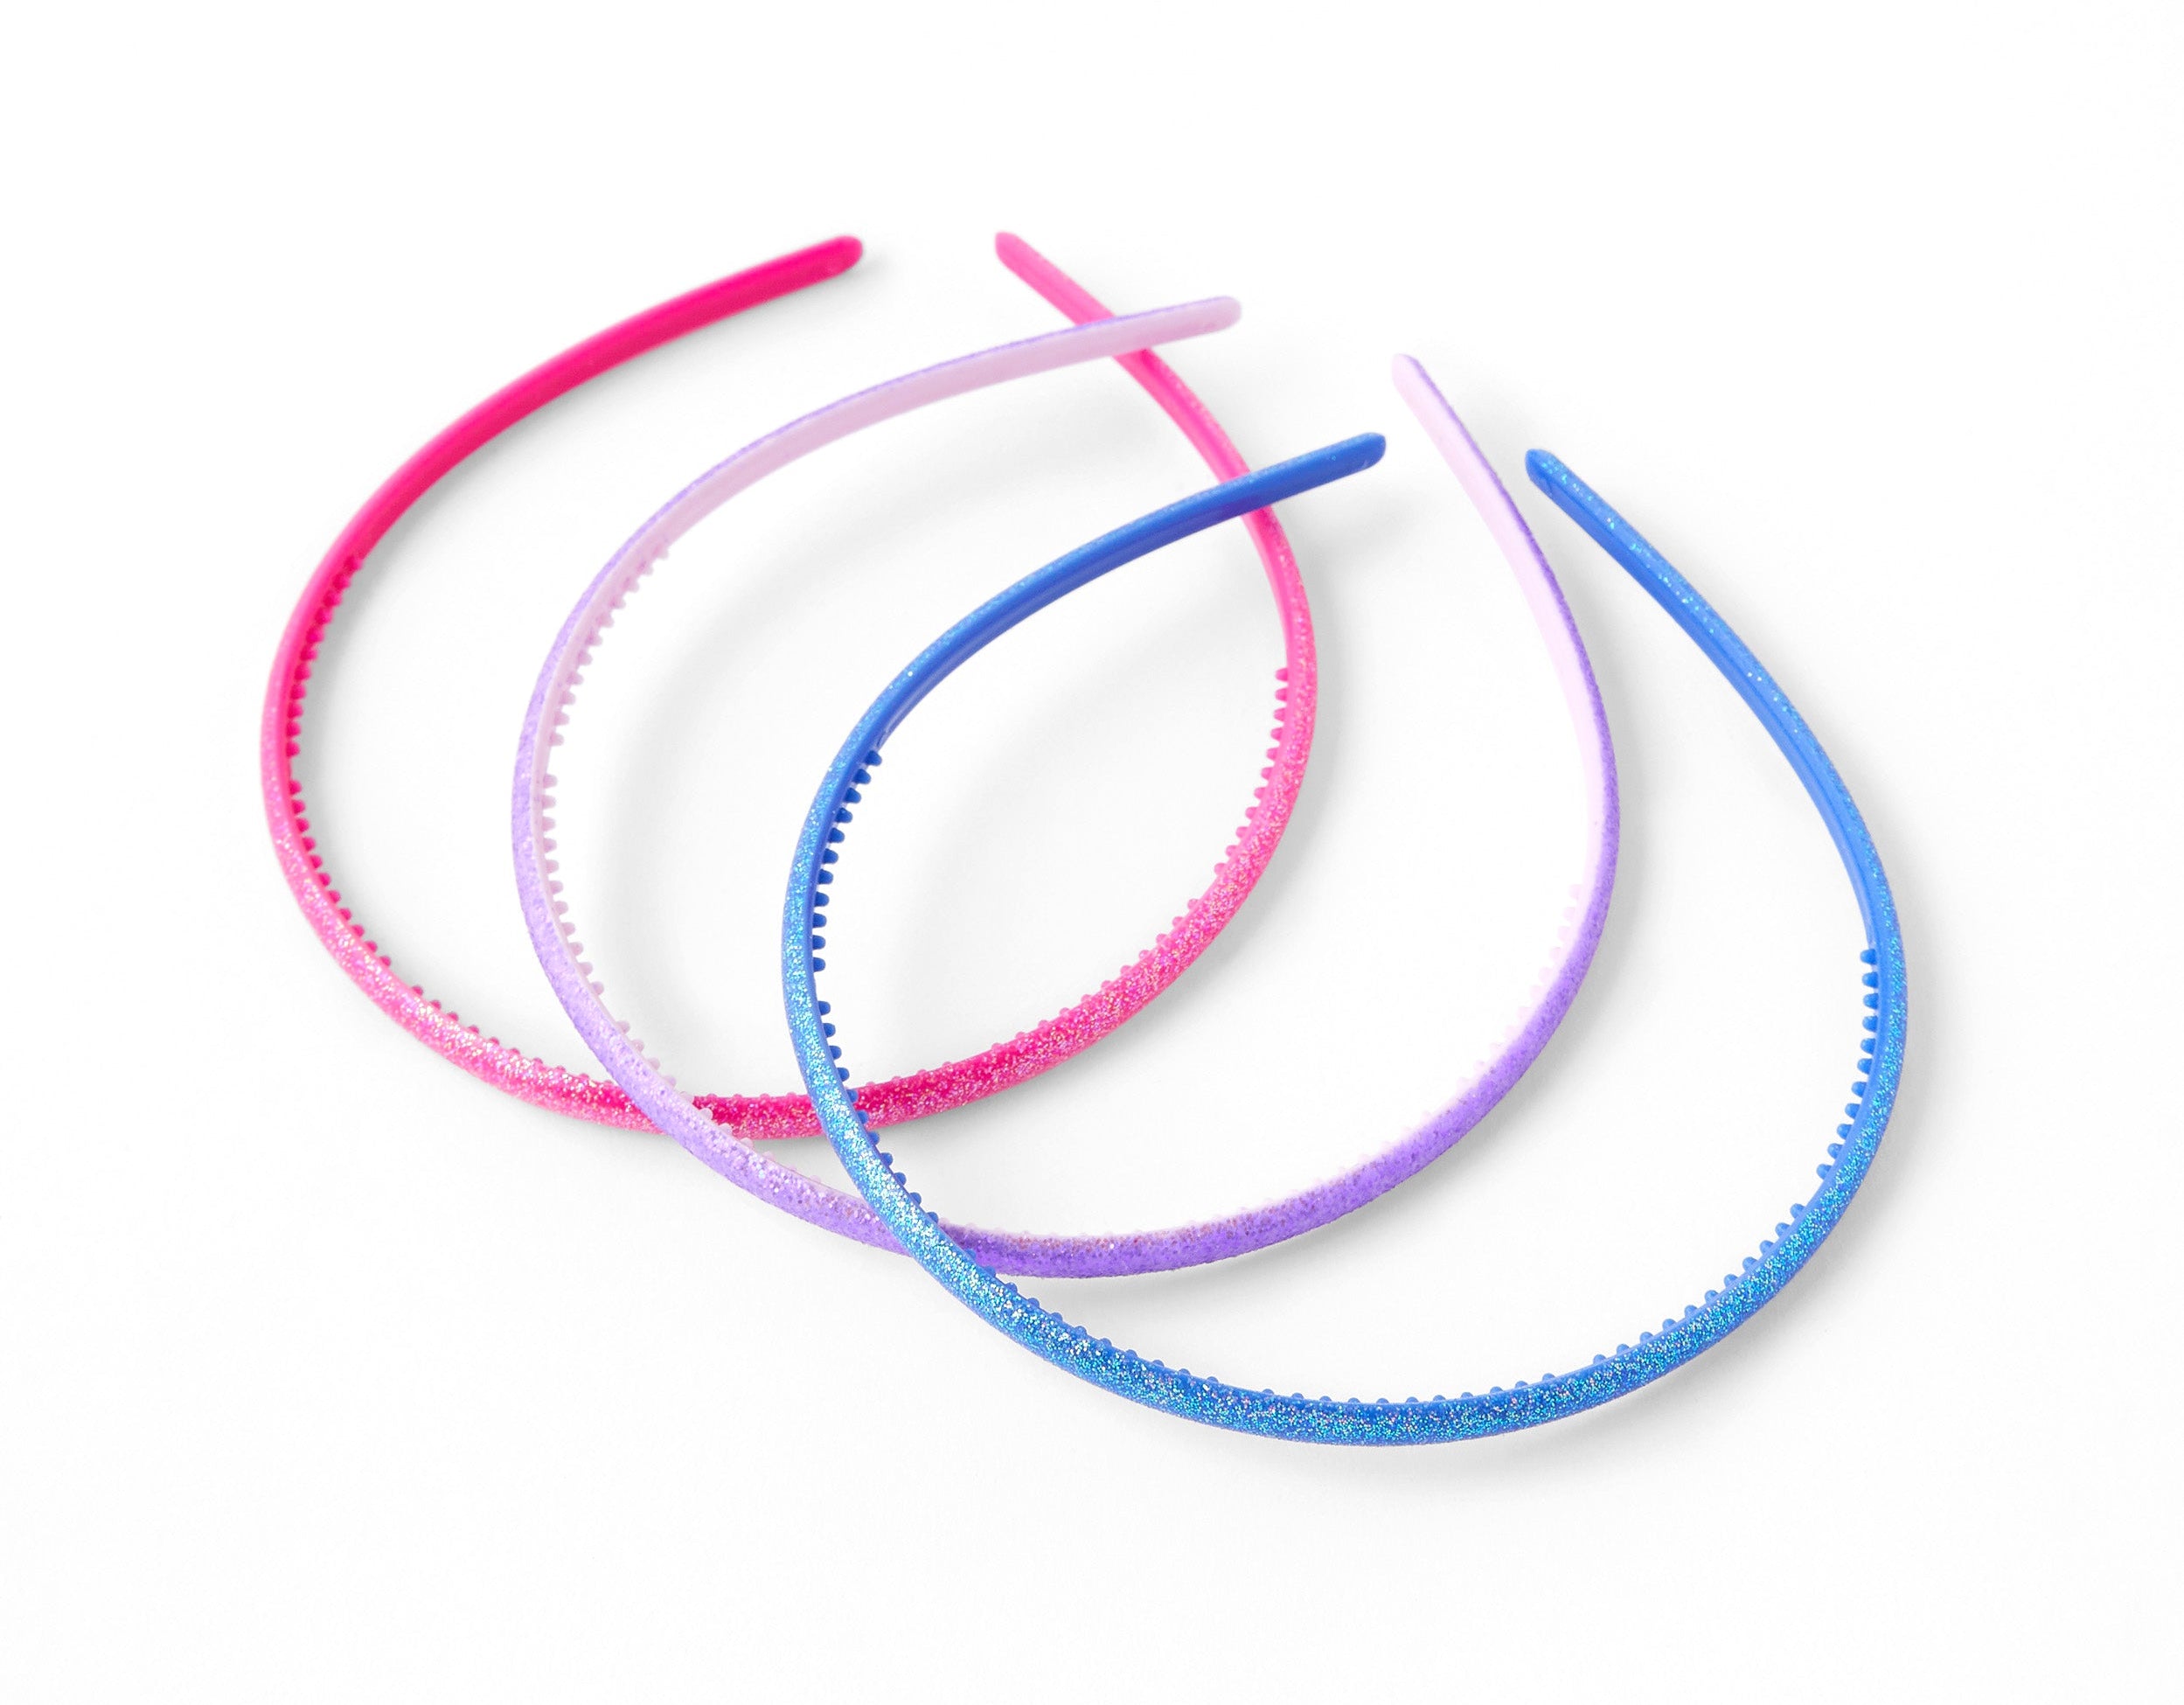 Accessorize London Pack Of 3 Skinny Alice Bands